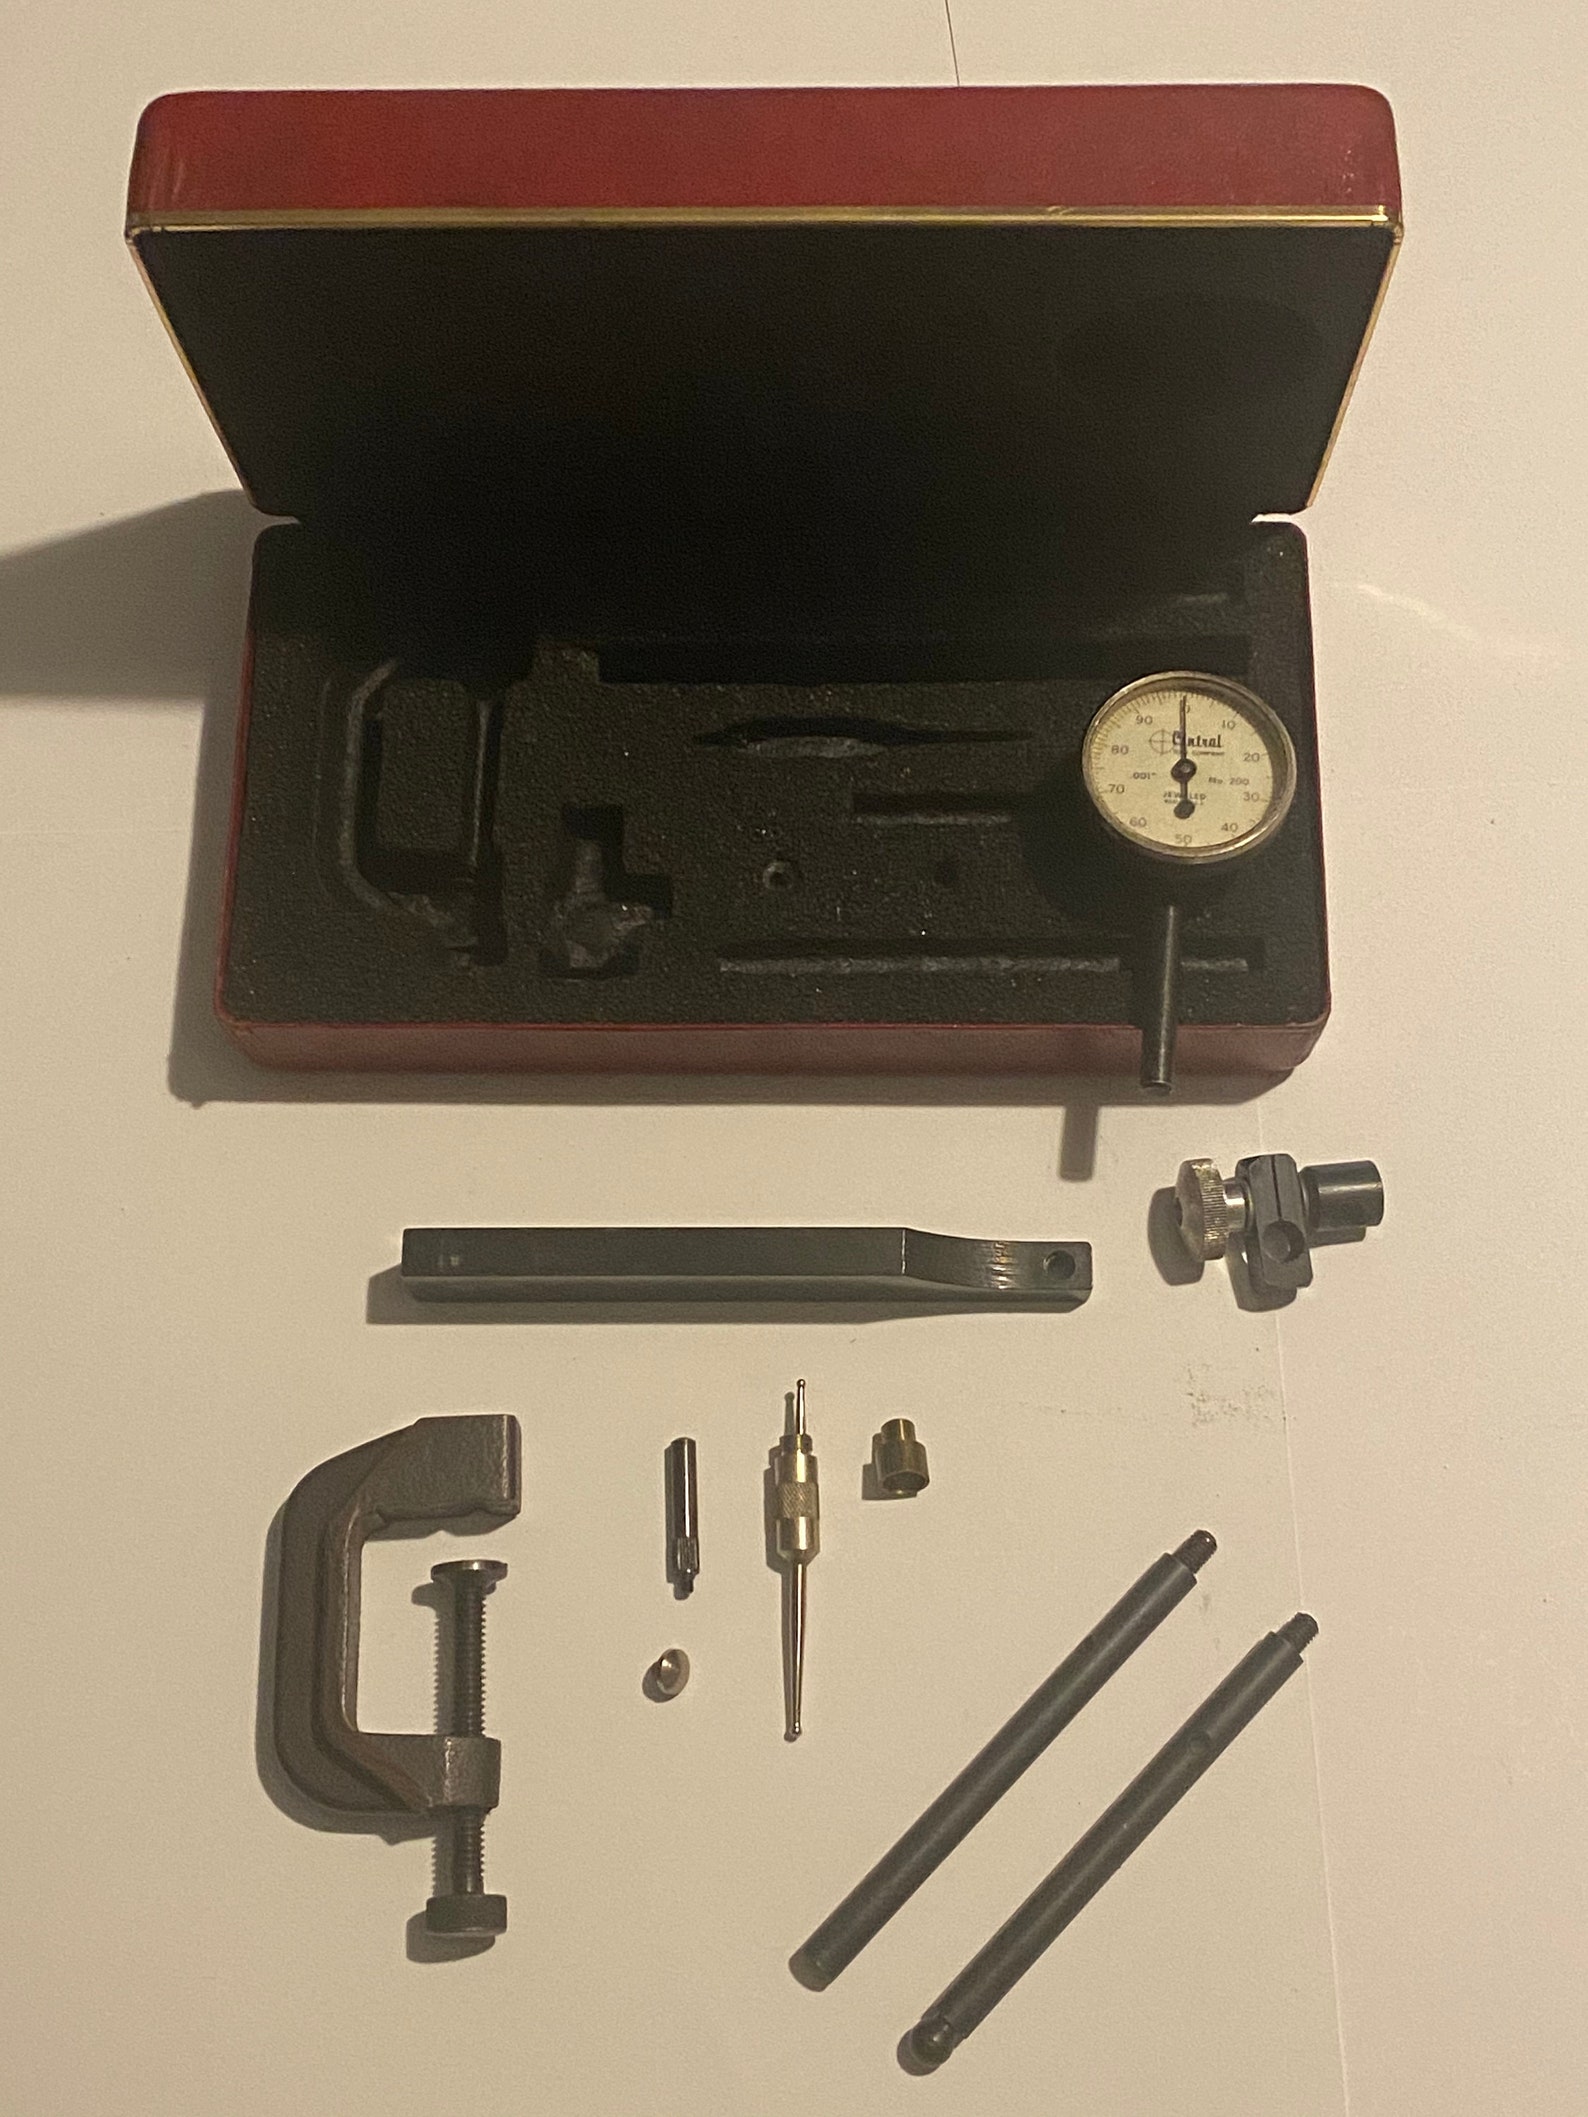 Central Tool Company Dial Indicator Complete Set | Etsy